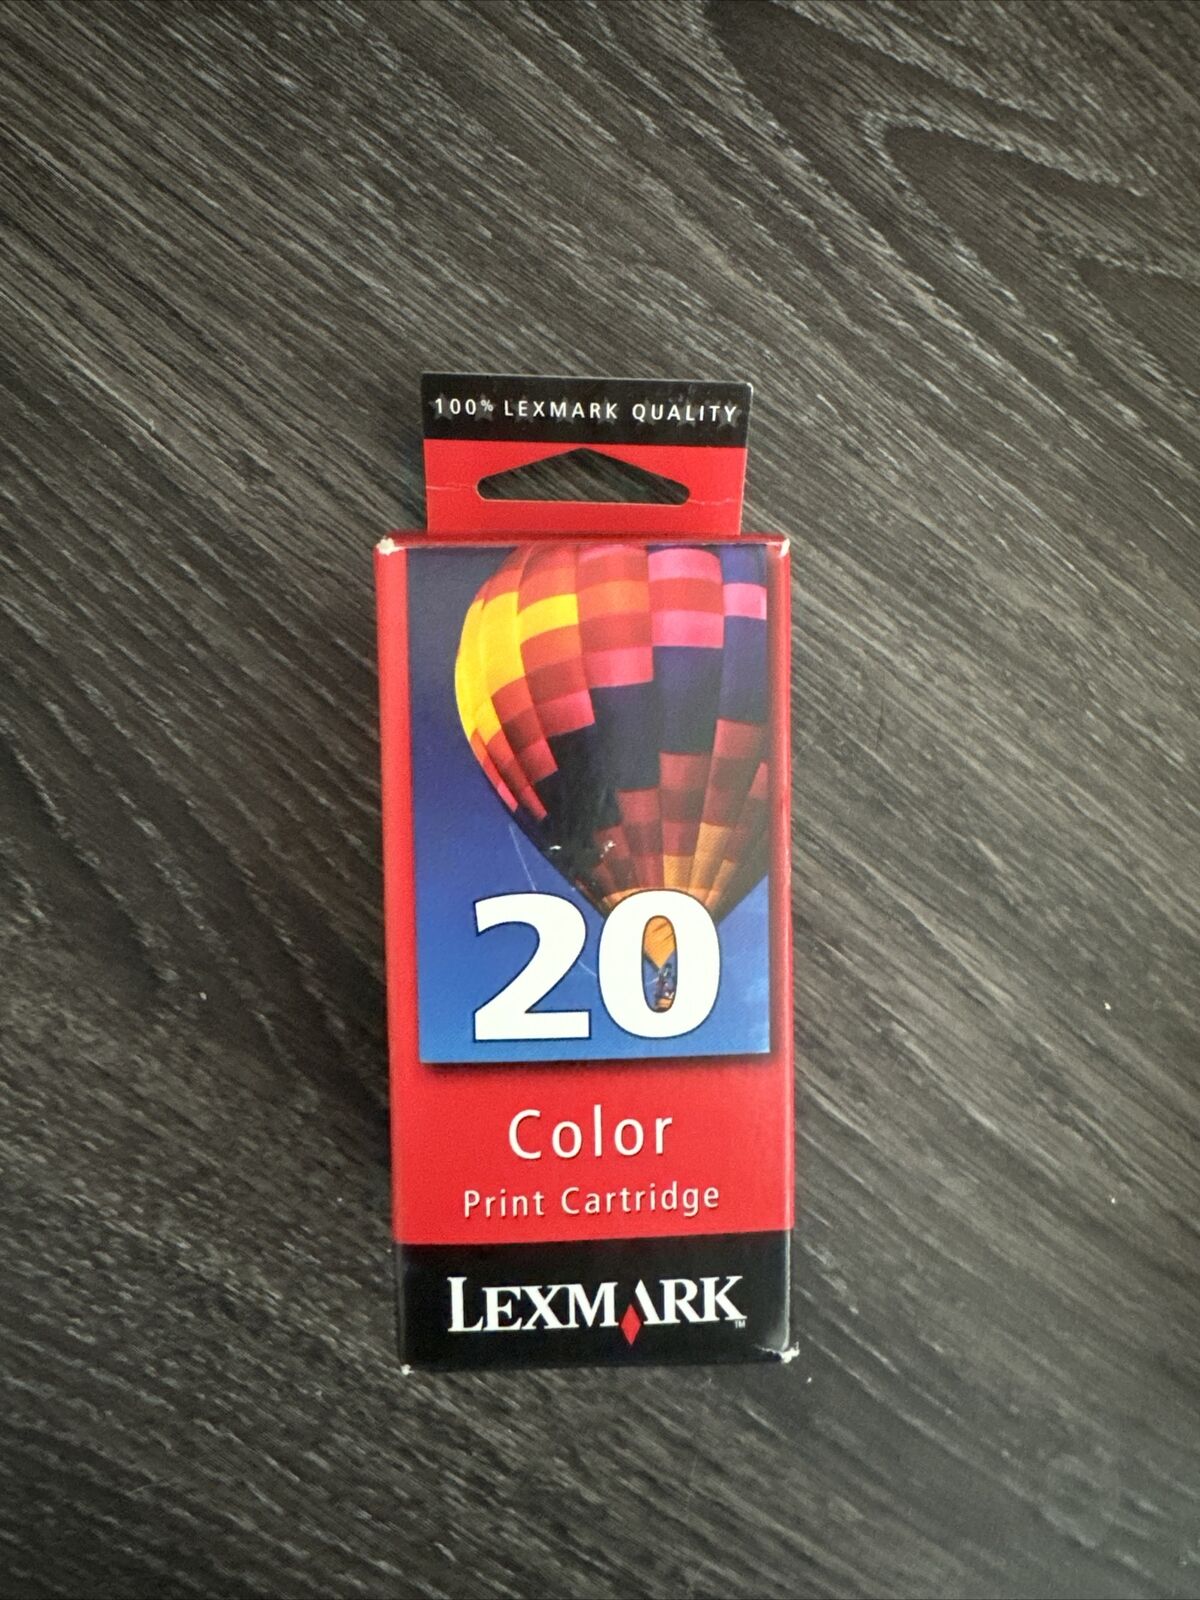 Lexmark 20 Color Ink Cartridge for P122 P700 P3100 X63 X73 X83 X85